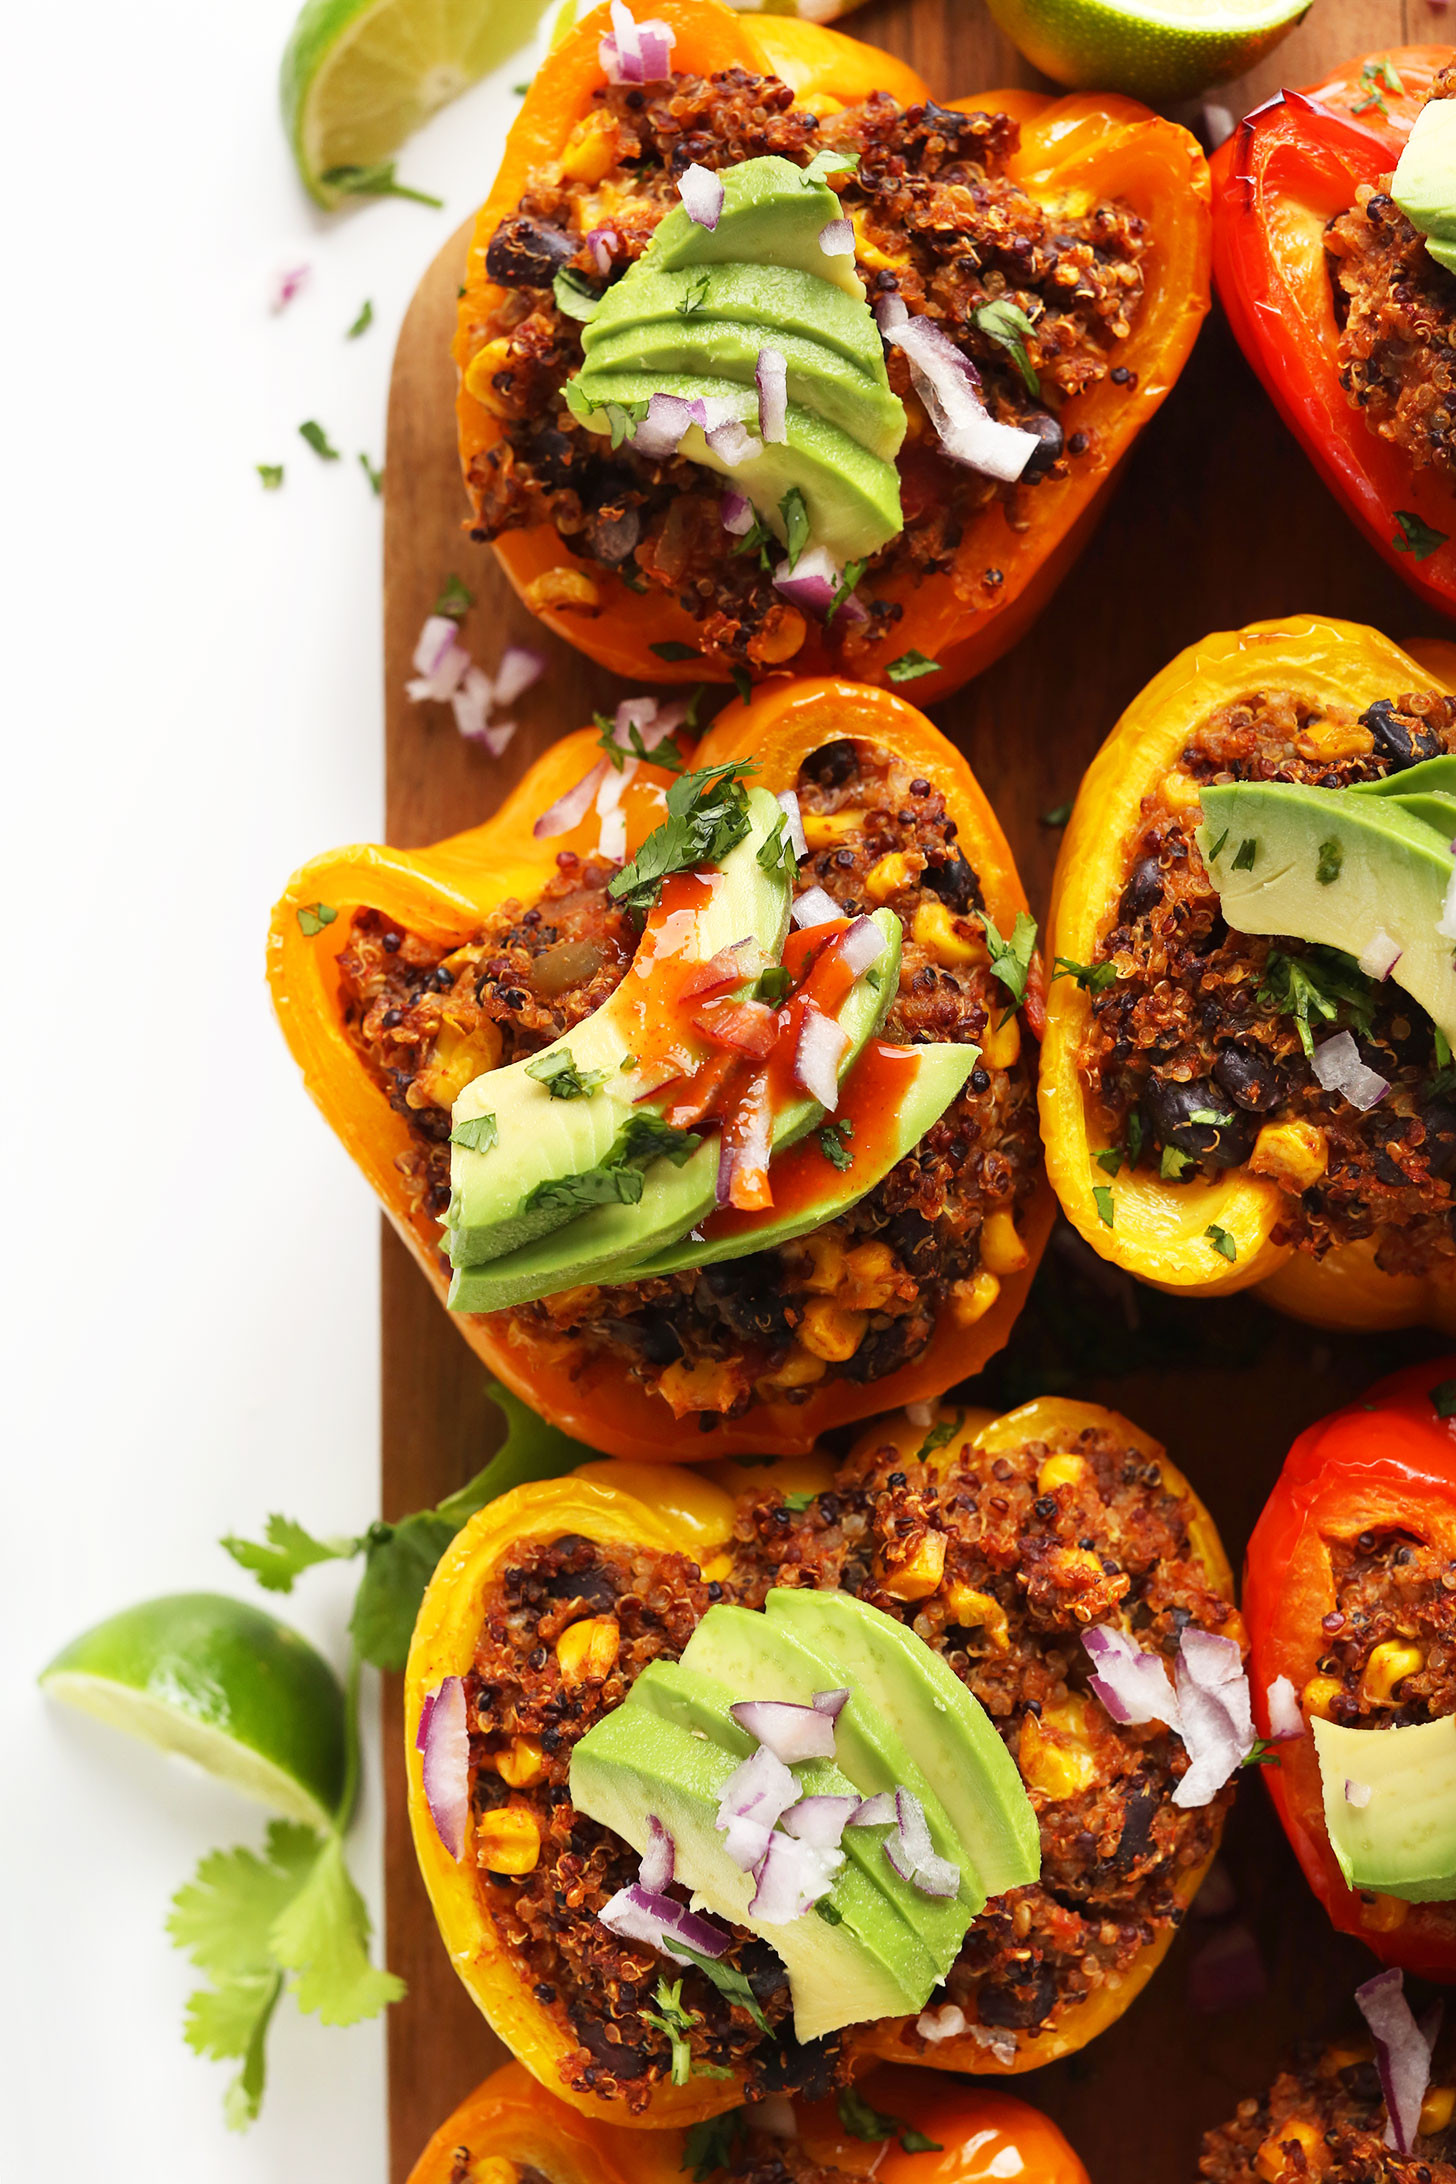 Vegan Stuffed Bell Peppers Recipe
 ideal protein stuffed bell peppers